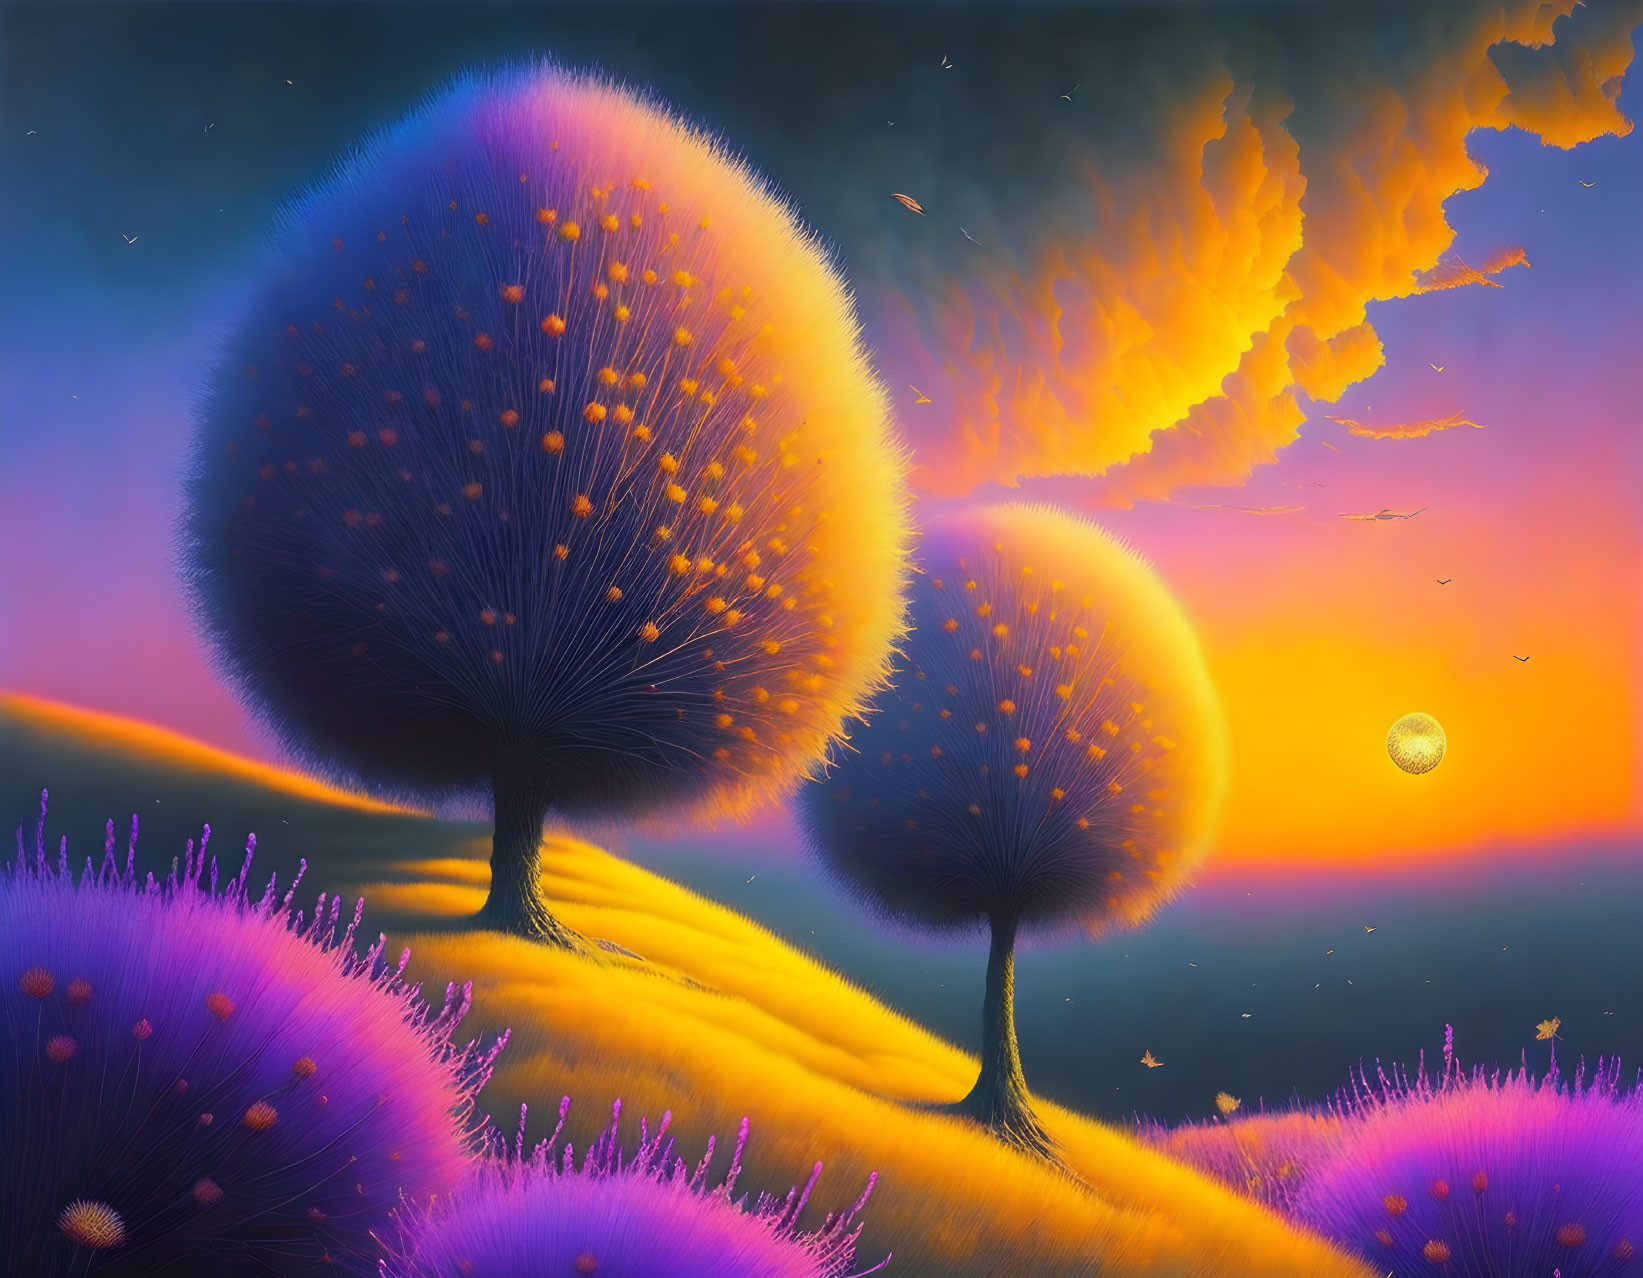 Colorful surreal trees in digital art against orange and blue sky